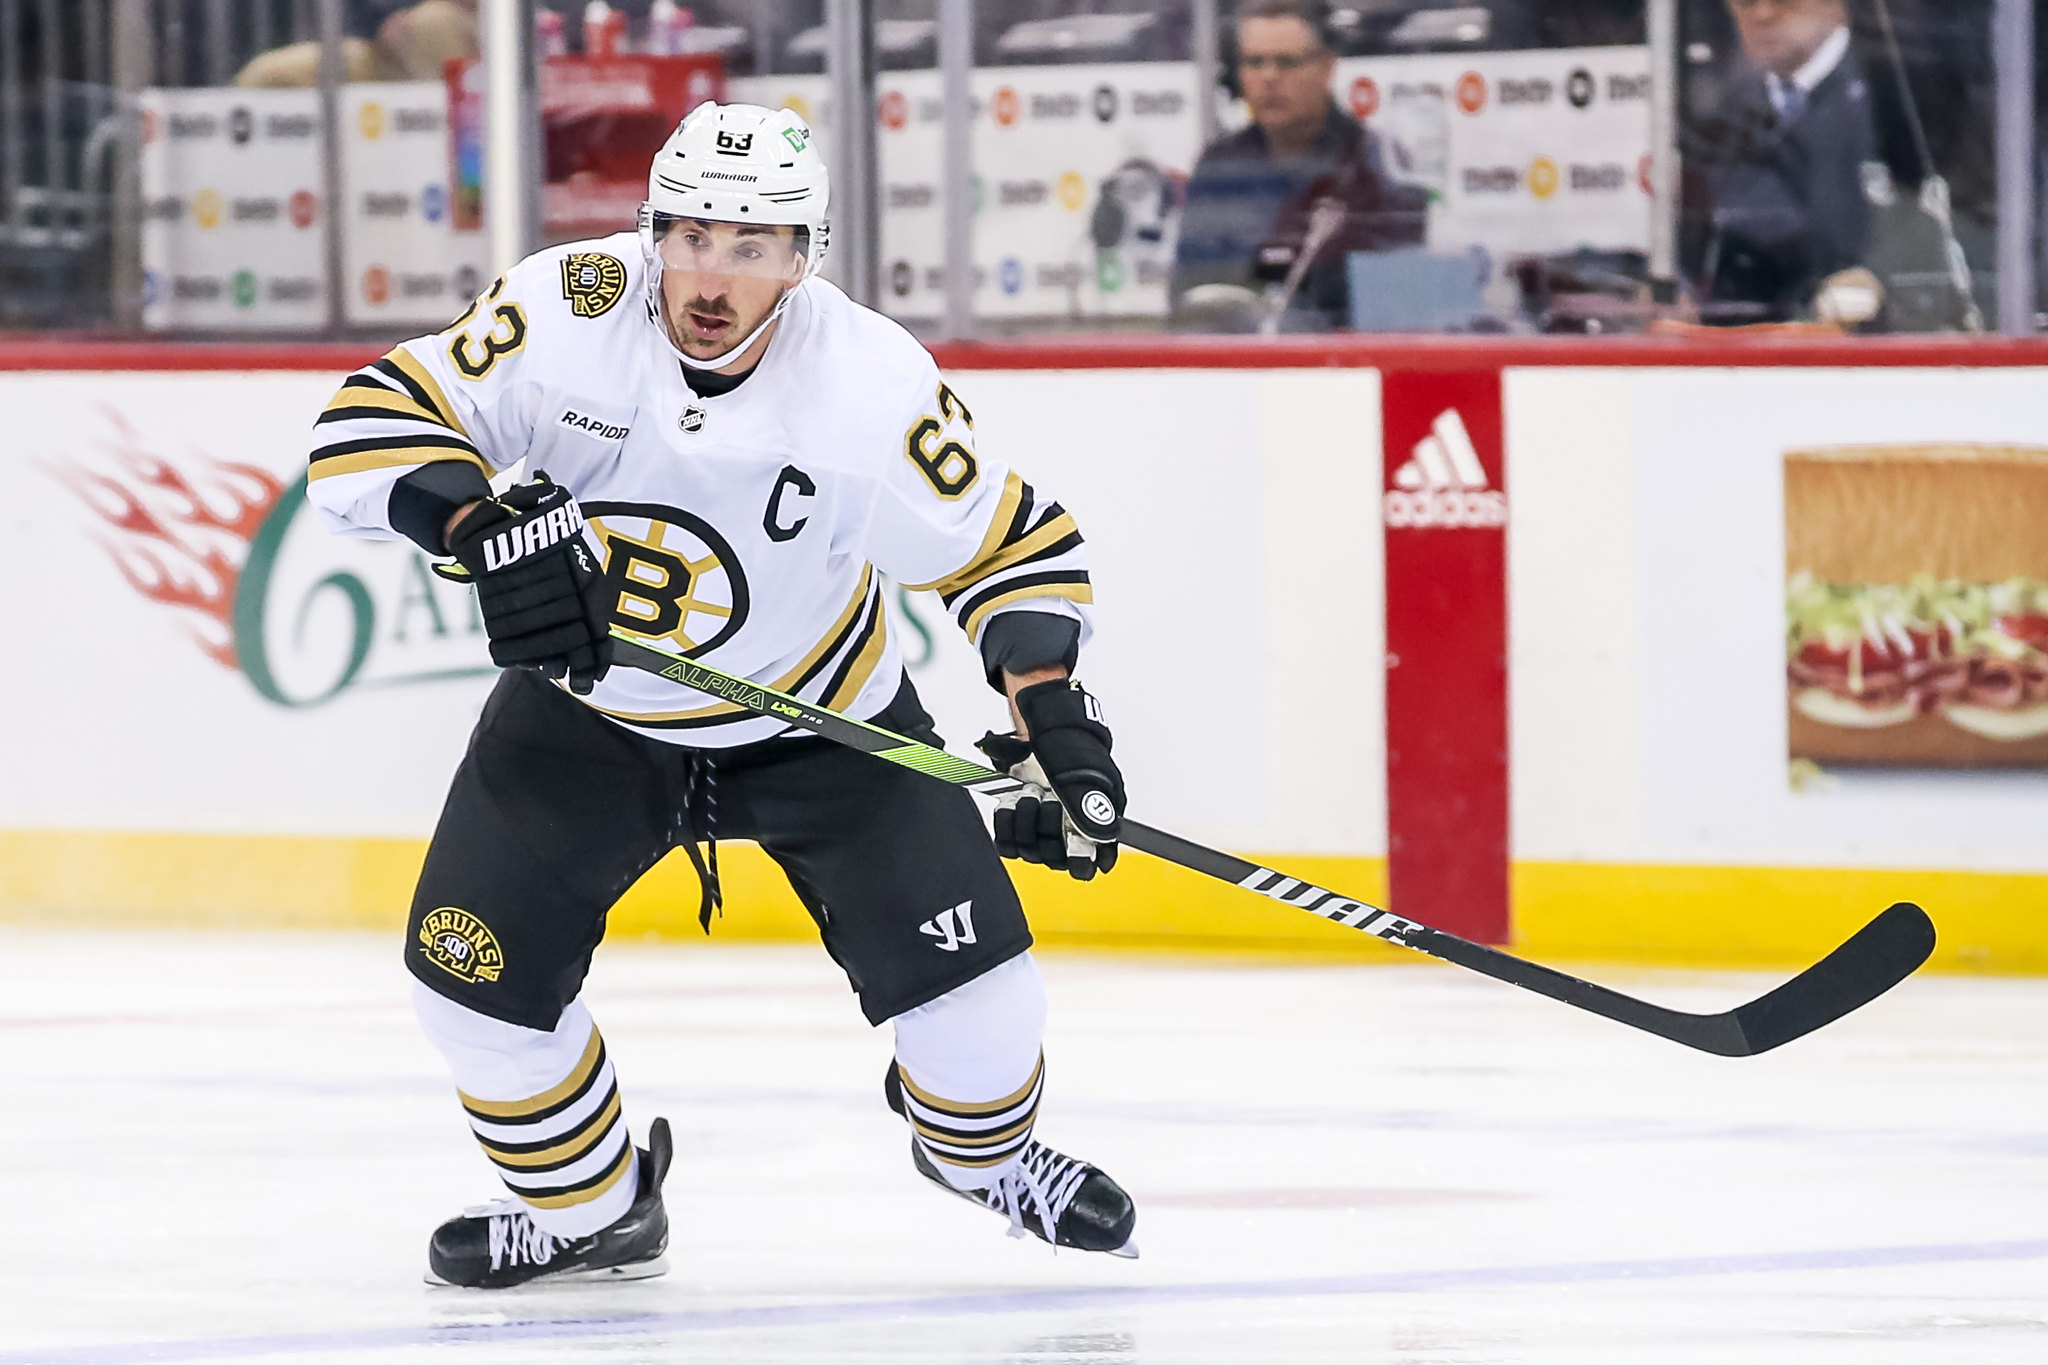 Bruins Notebook: No Presidents' Trophy Pressure This Time - The Hockey Writers Latest News, Analysis & More